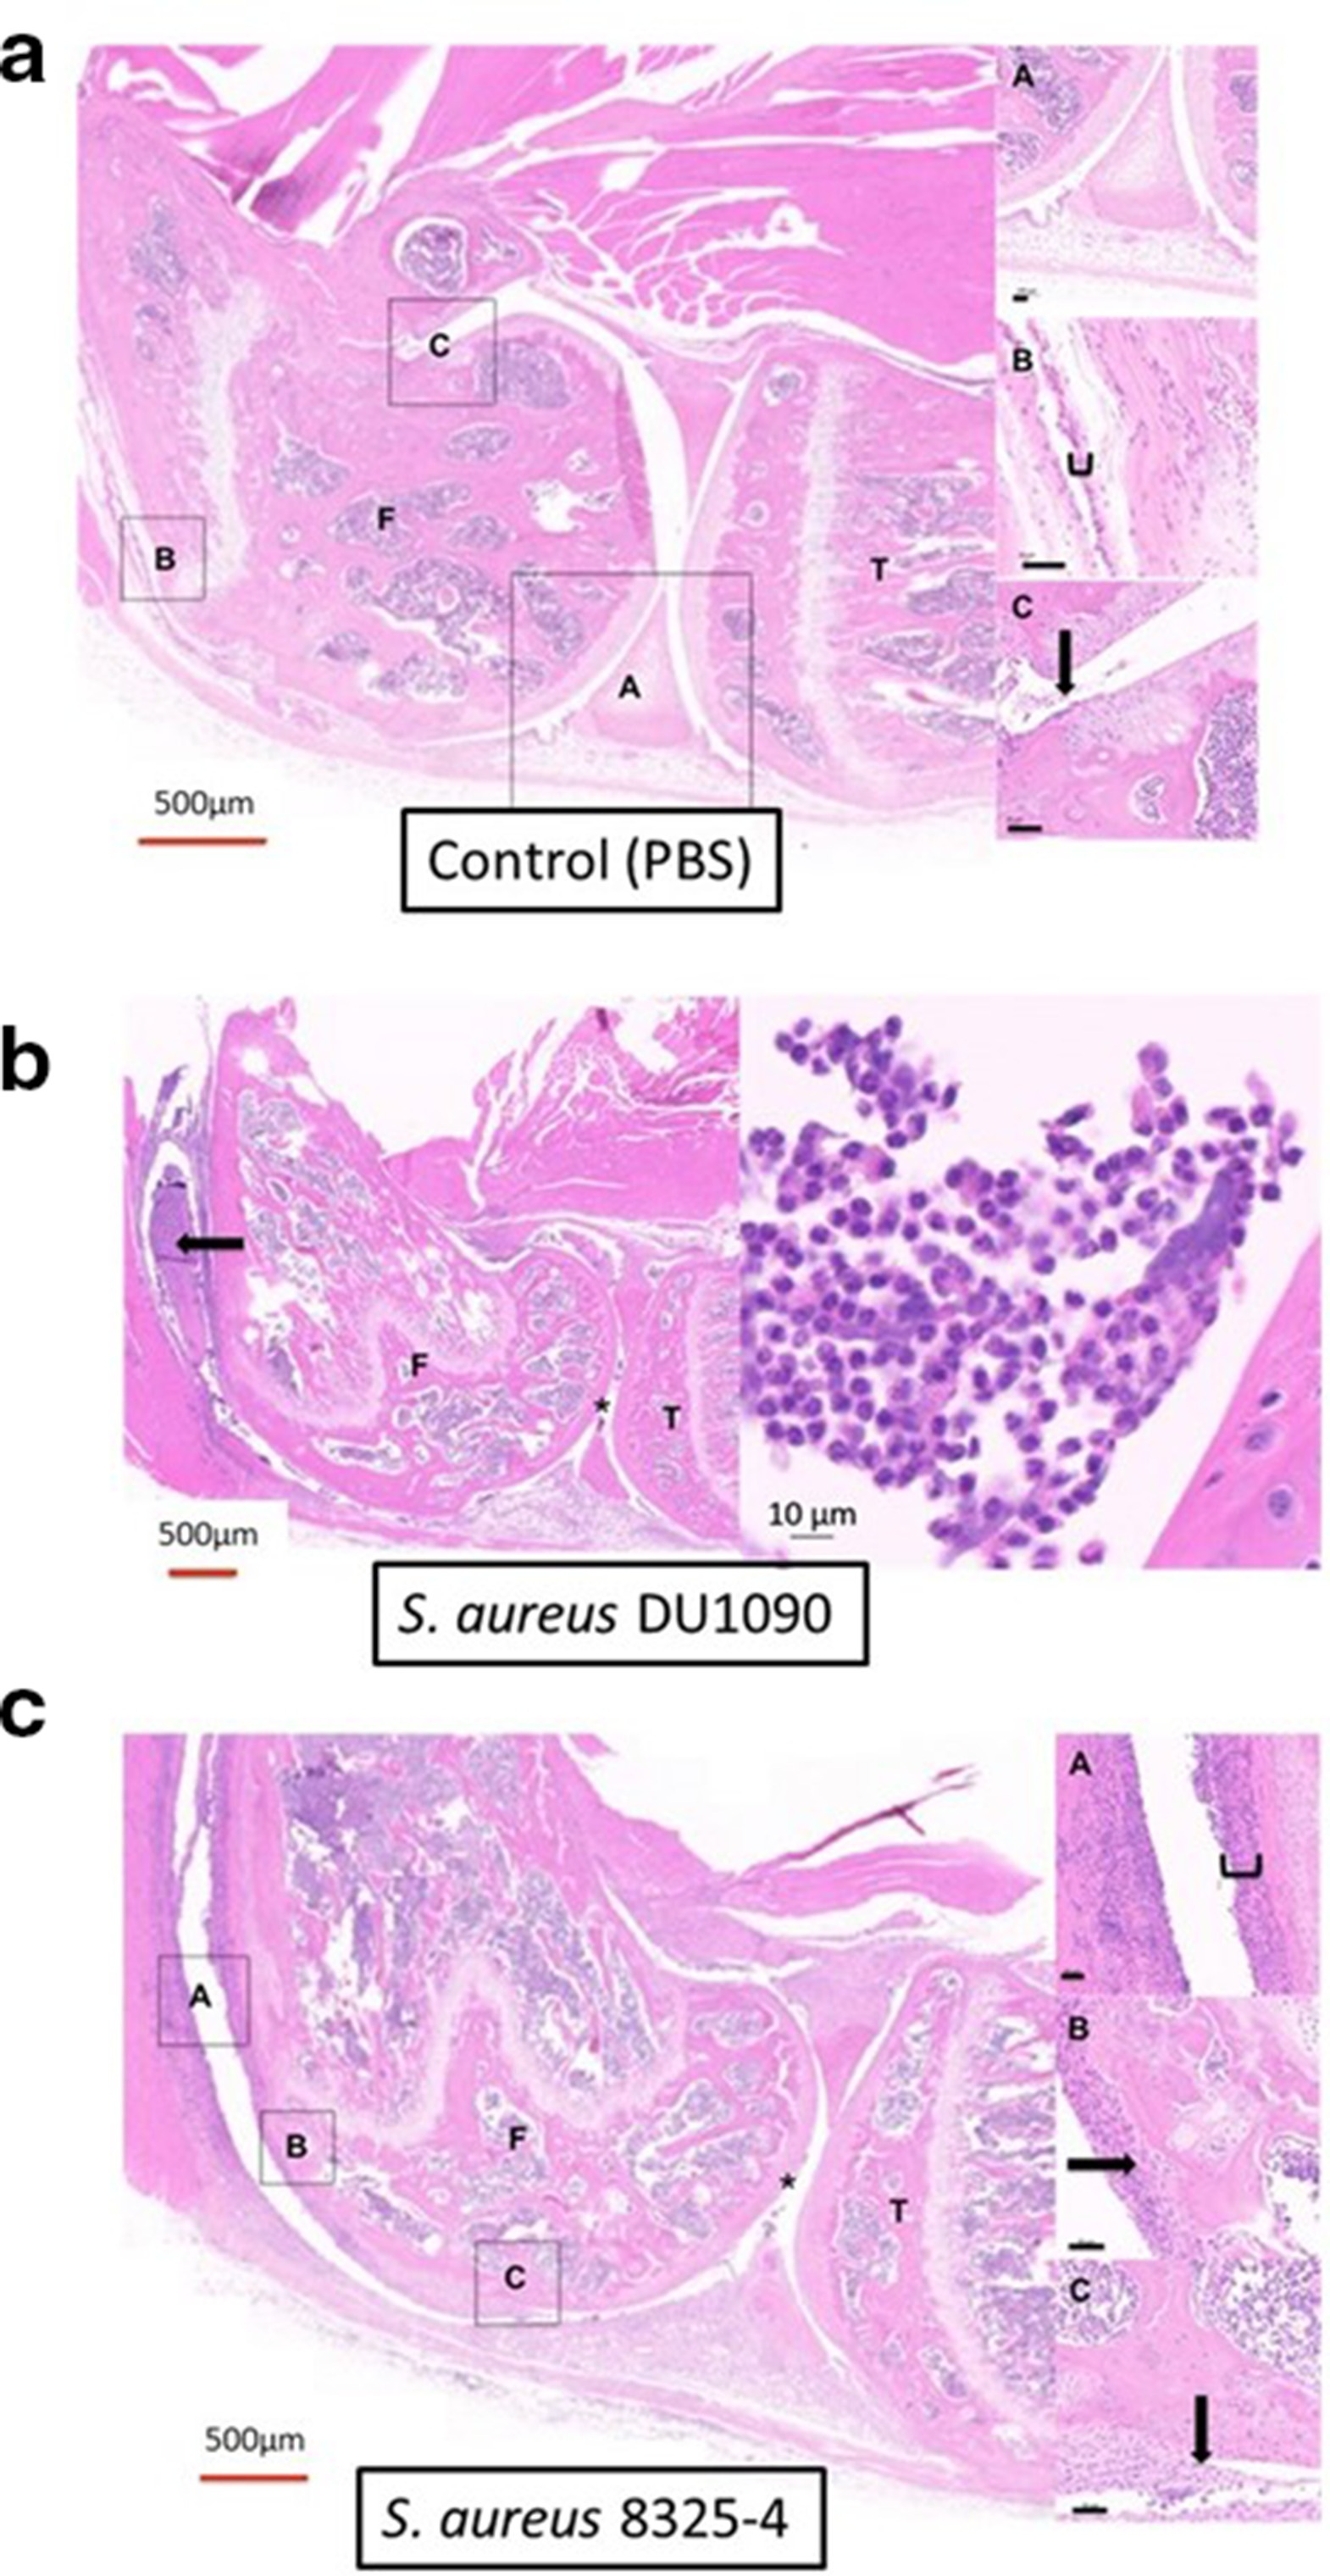 Fig. 2 
            Histological appearance of the right stifle joints of mice following injection with or without bacteria. a) A control (phosphate-buffered saline (PBS)) joint seven days following injection illustrating normal joint architecture (F = femur, T = tibia). A = normal articular cartilage with no evidence of inflammatory cells within the joint space; B = single layer of synovium; and C = normal cartilage-synovium interface with absence of pannus formation. Red scale bar = 500 μm, black scale bars = 50 μm. b) A joint two days following injection with Staphylococcus aureus DU1090, including a magnified view of the inflammatory infiltrate. There was an increased joint space secondary to effusion and the presence of inflammatory cells in the joint (horizontal arrow). There was mild synovial hypertrophy visible either side of this and very early pannus formation. The inflammatory infiltrate was dominated by neutrophils. Red scale bar = 500 μm. c) Appearance seven days after joint injection with S. aureus 8325-4. Images on the right: (a), (b) and (c) are magnified from the main picture on the left. There was: (a) severe synovial hypertrophy (block), (b) bone erosions (horizontal arrow), and (c) pannus formation (downward arrow). Despite this, the majority of the articular surface appeared to be macroscopically intact (asterisk). Magnification: ×60.
          